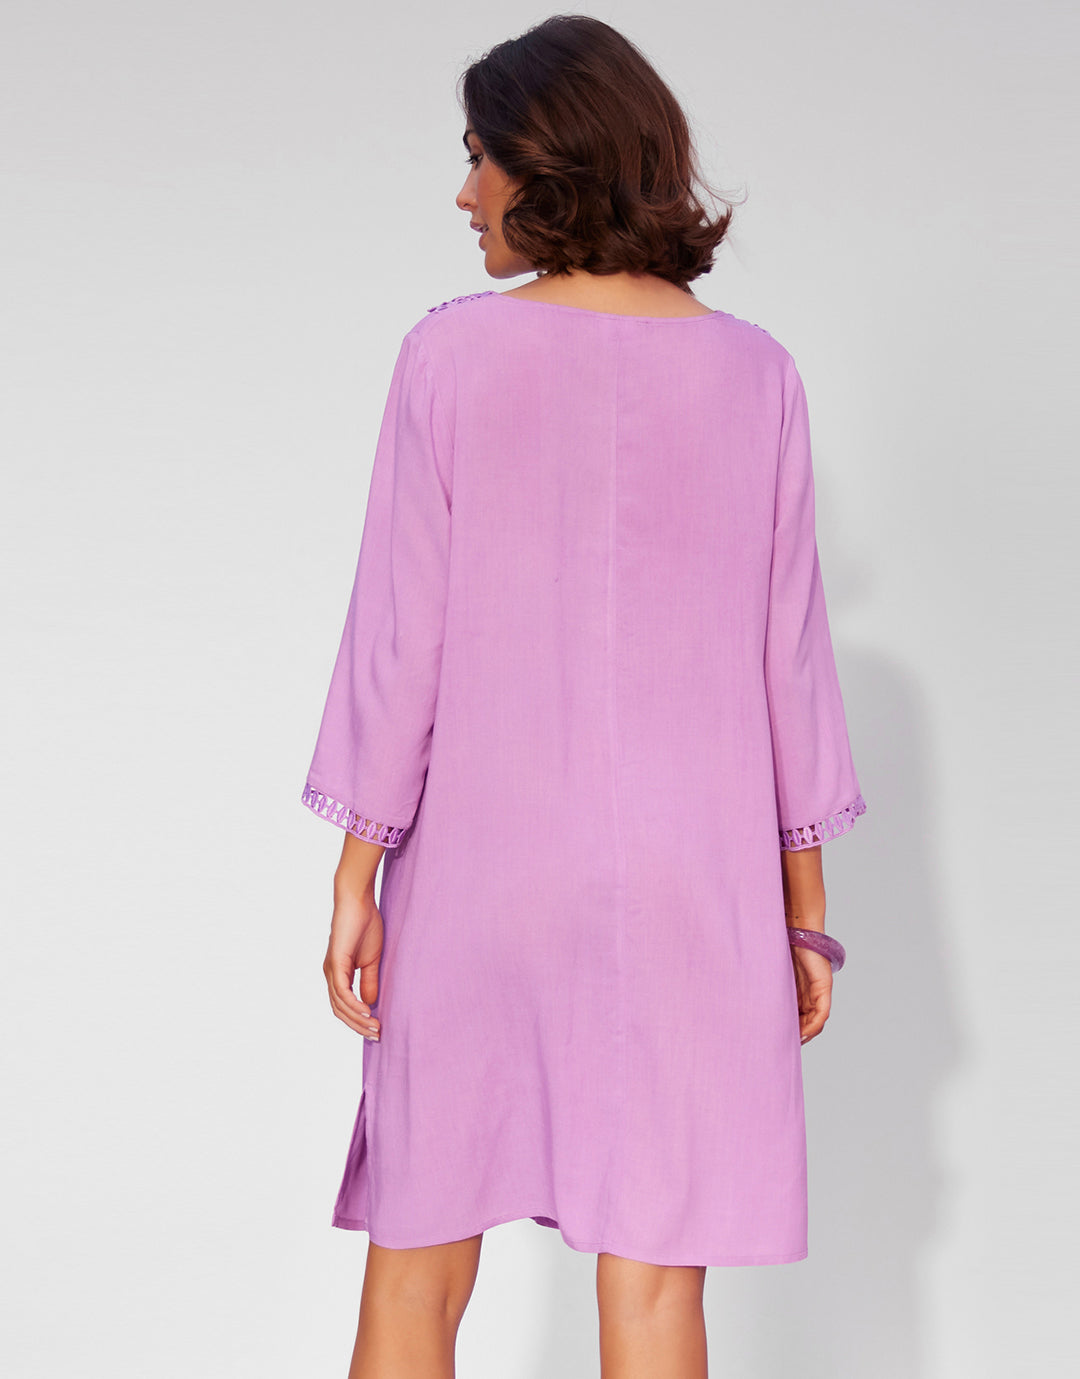 Embroidered Tunic - Violet - Simply Beach UK